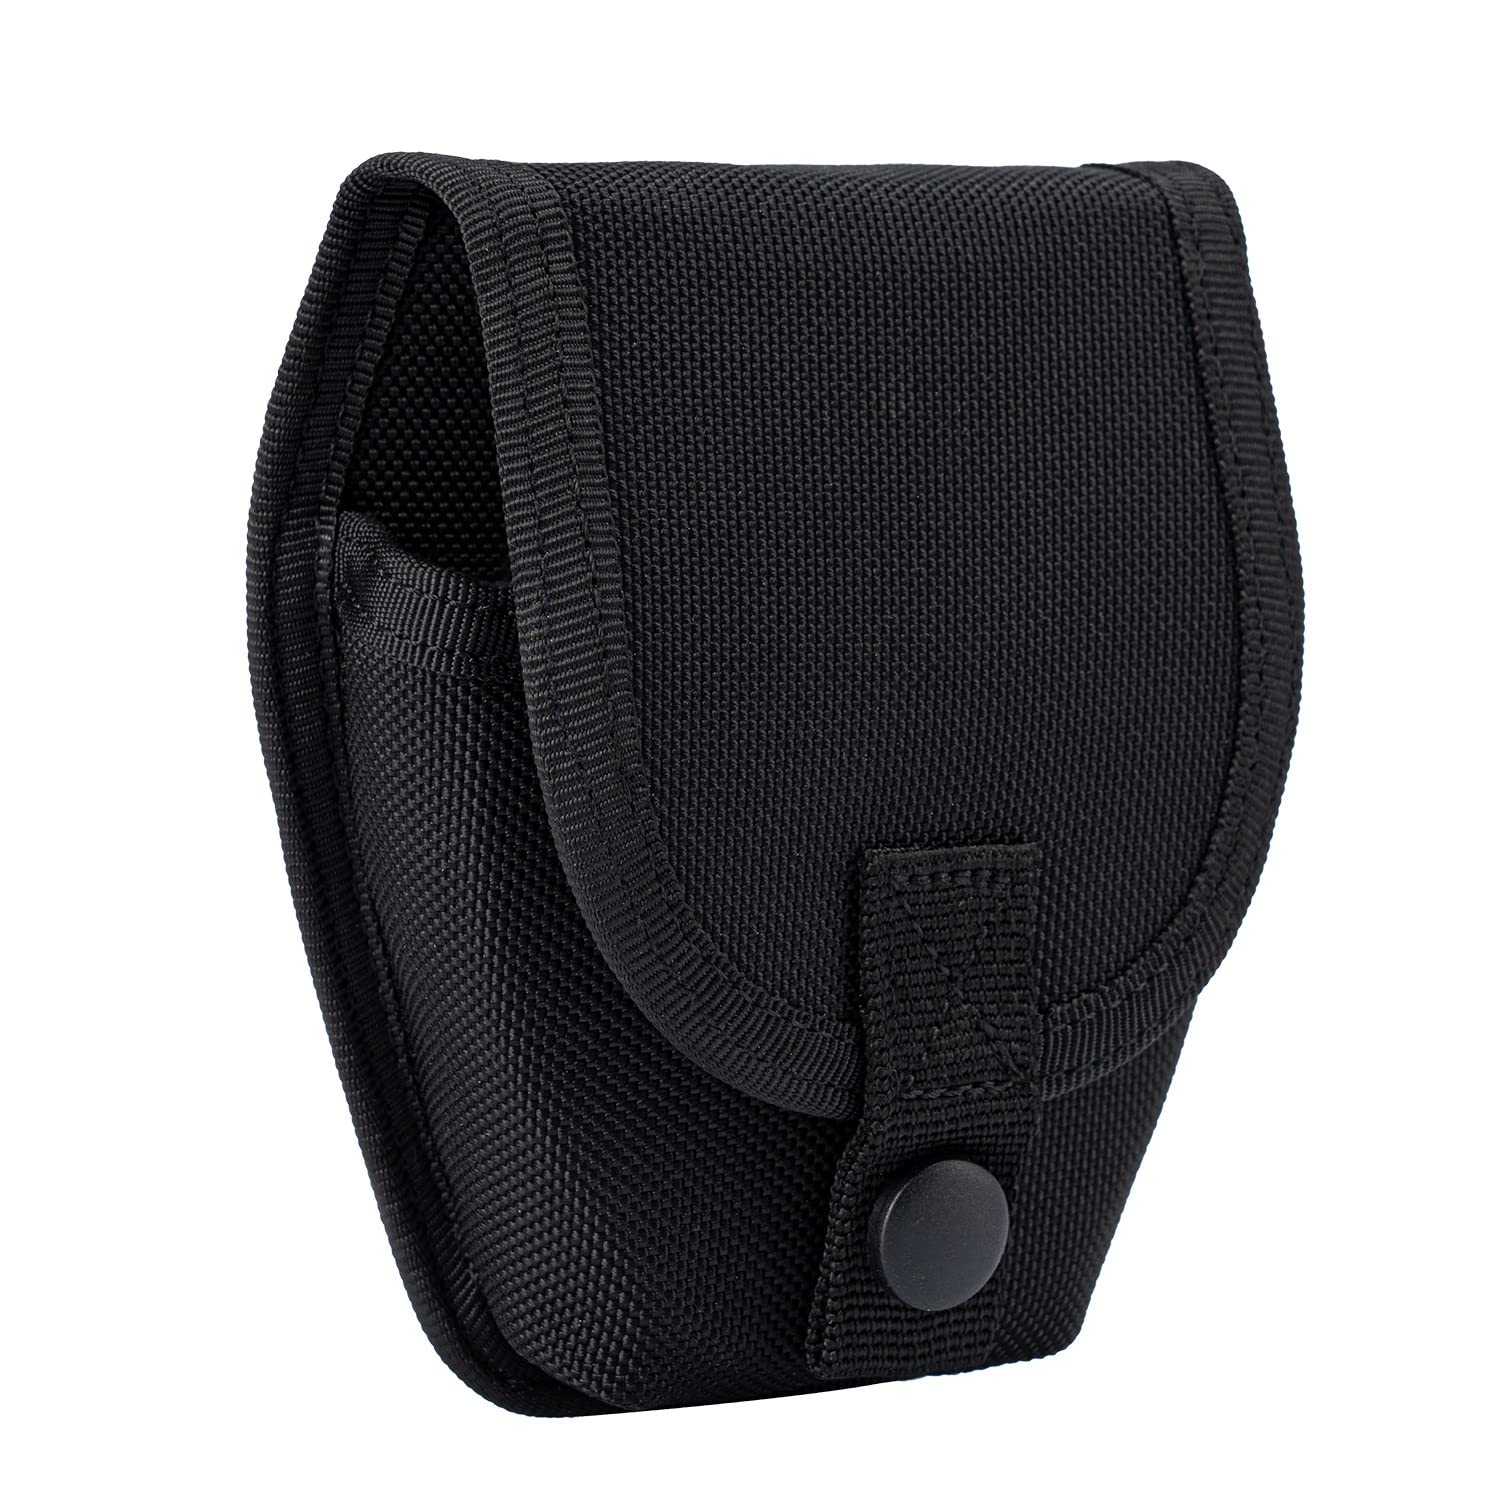 Police Force Tactical PFHCH Handcuff Holster